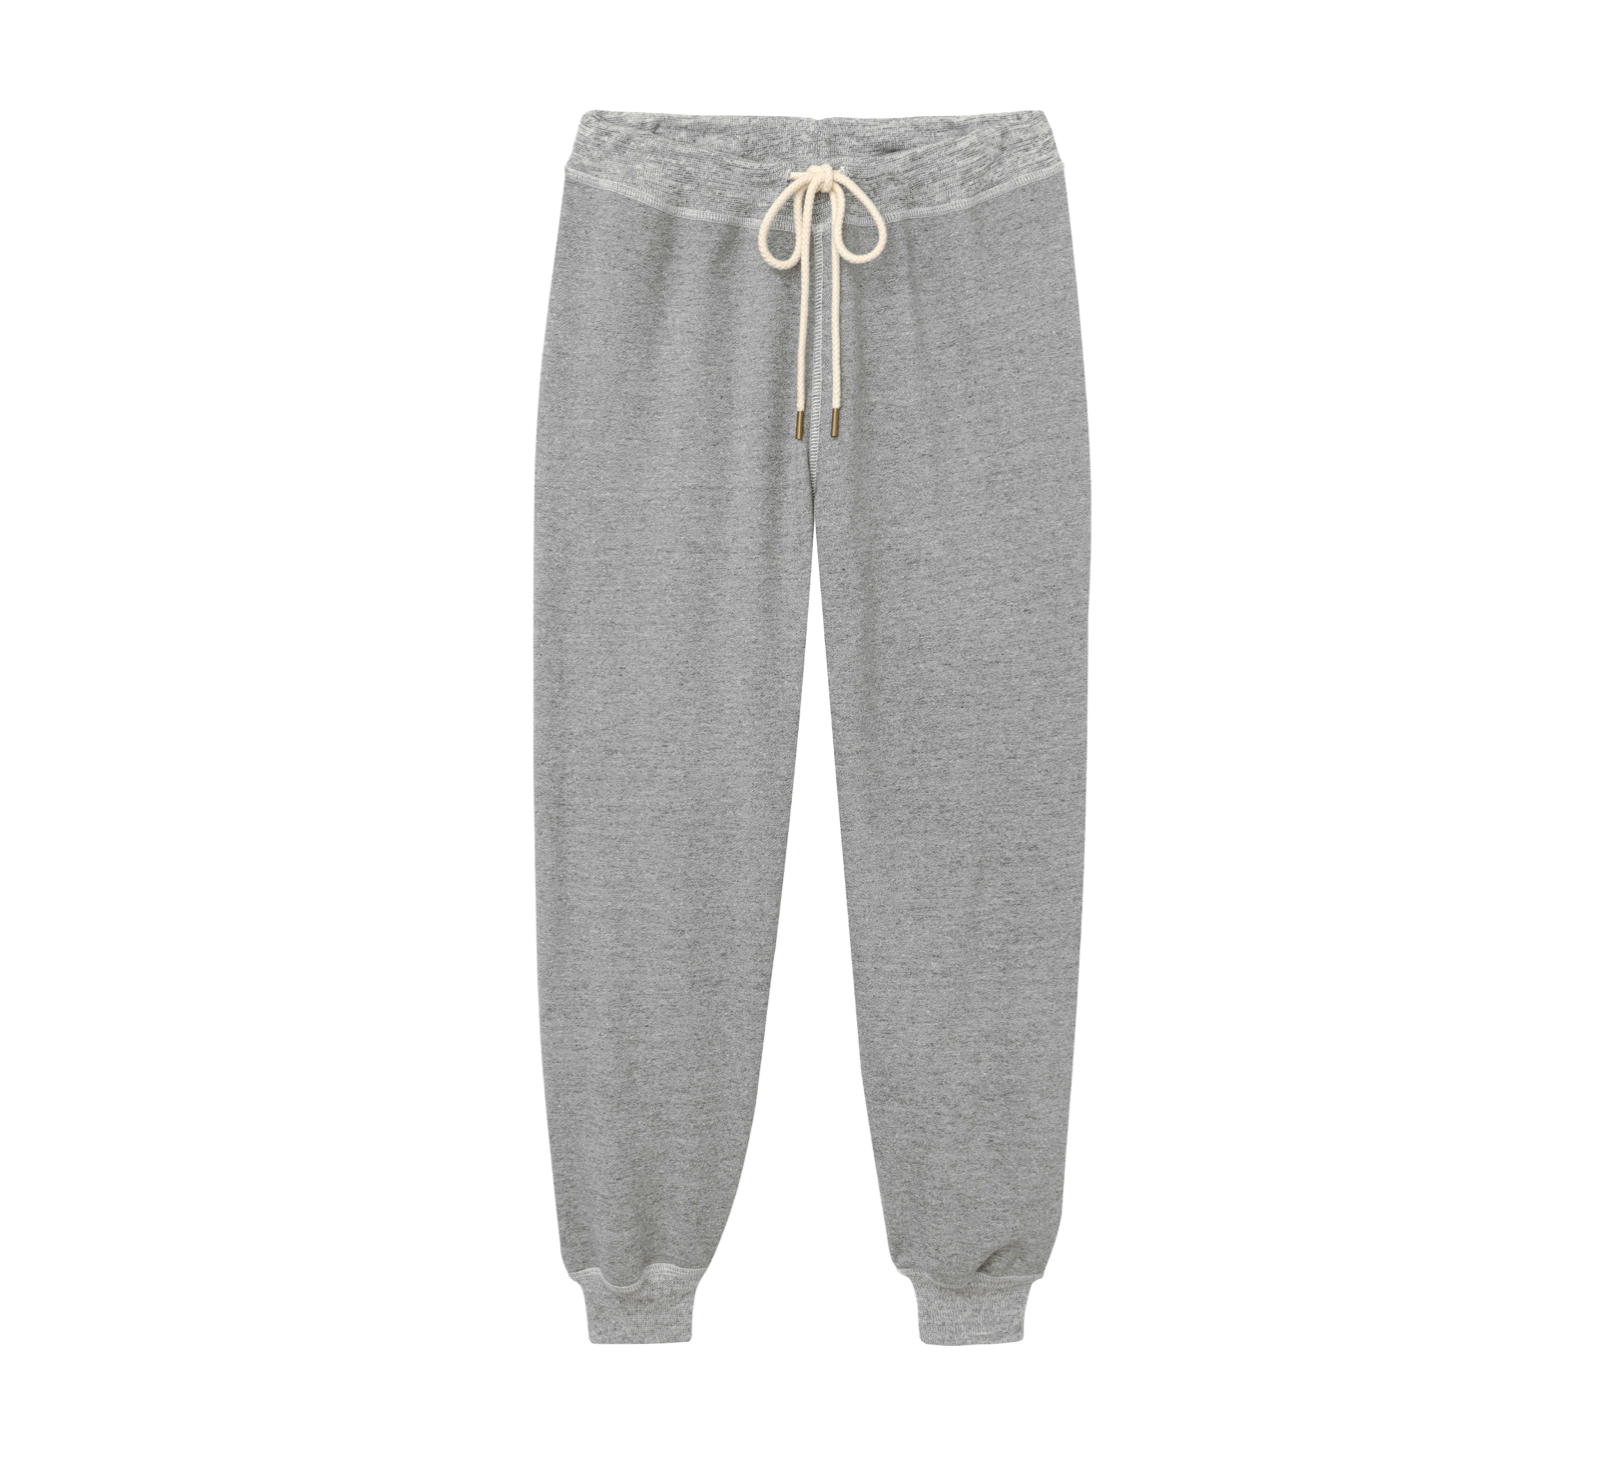 The Cropped Sweatpants in Varsity Gray